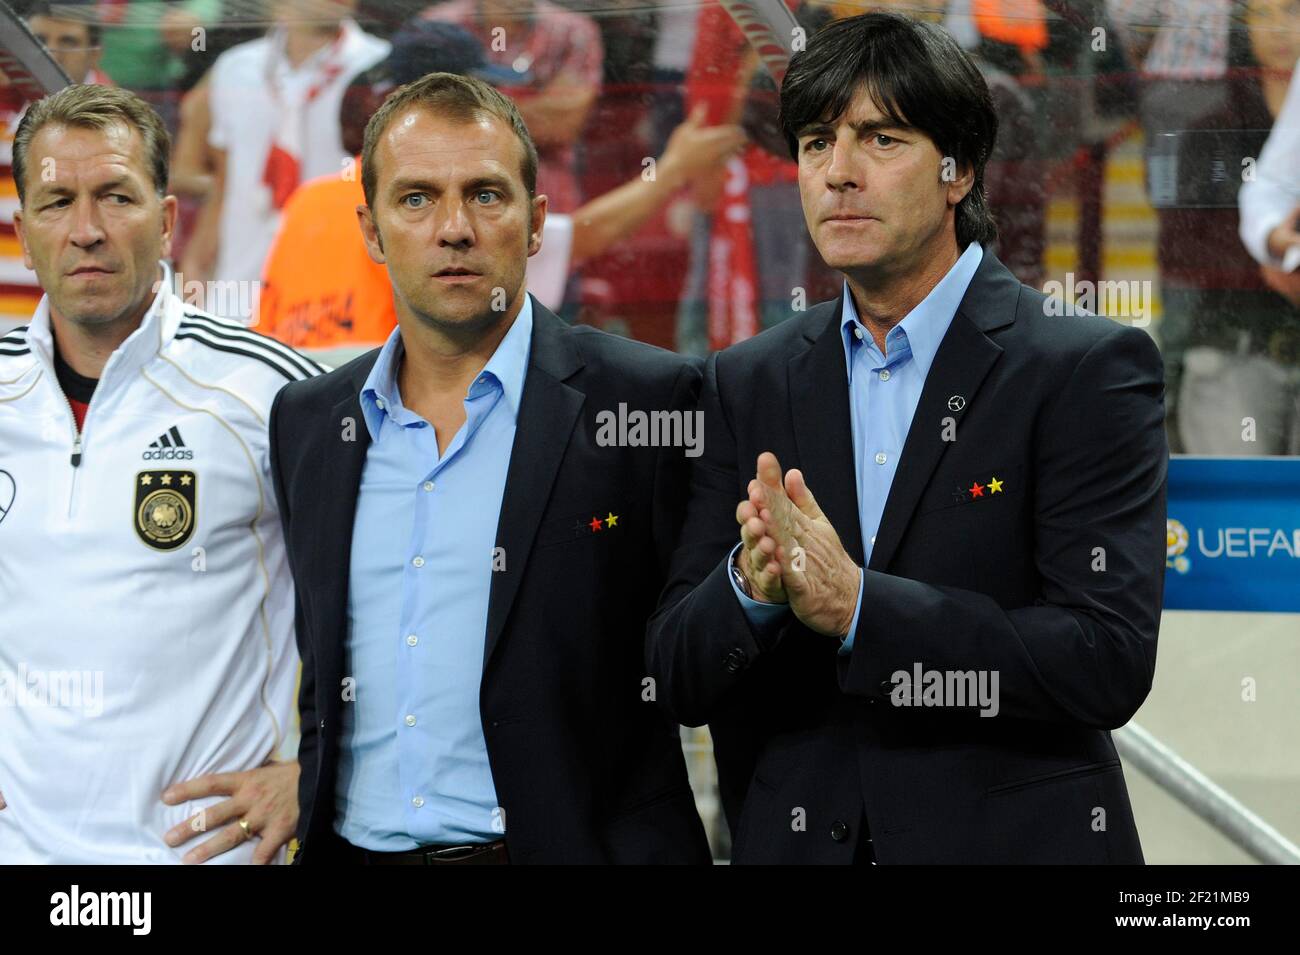 Hans Dieter Flick (Hansi, coach FC Bayern Munich) preferred candidate on the aftermath of national coach Joachim Jogi LOEW (GER) Archive photo: from left: Hans Dieter FLICK, co coach (GER), federal coach Joachim Jogi LOEW, LOW (GER), gesture, applaud. Soccer Laenderspiel EM qualification game for UEFA Euro 2012 in Poland/Ukraine, Turkey - Germany on 07.10.2011. | usage worldwide Stock Photo